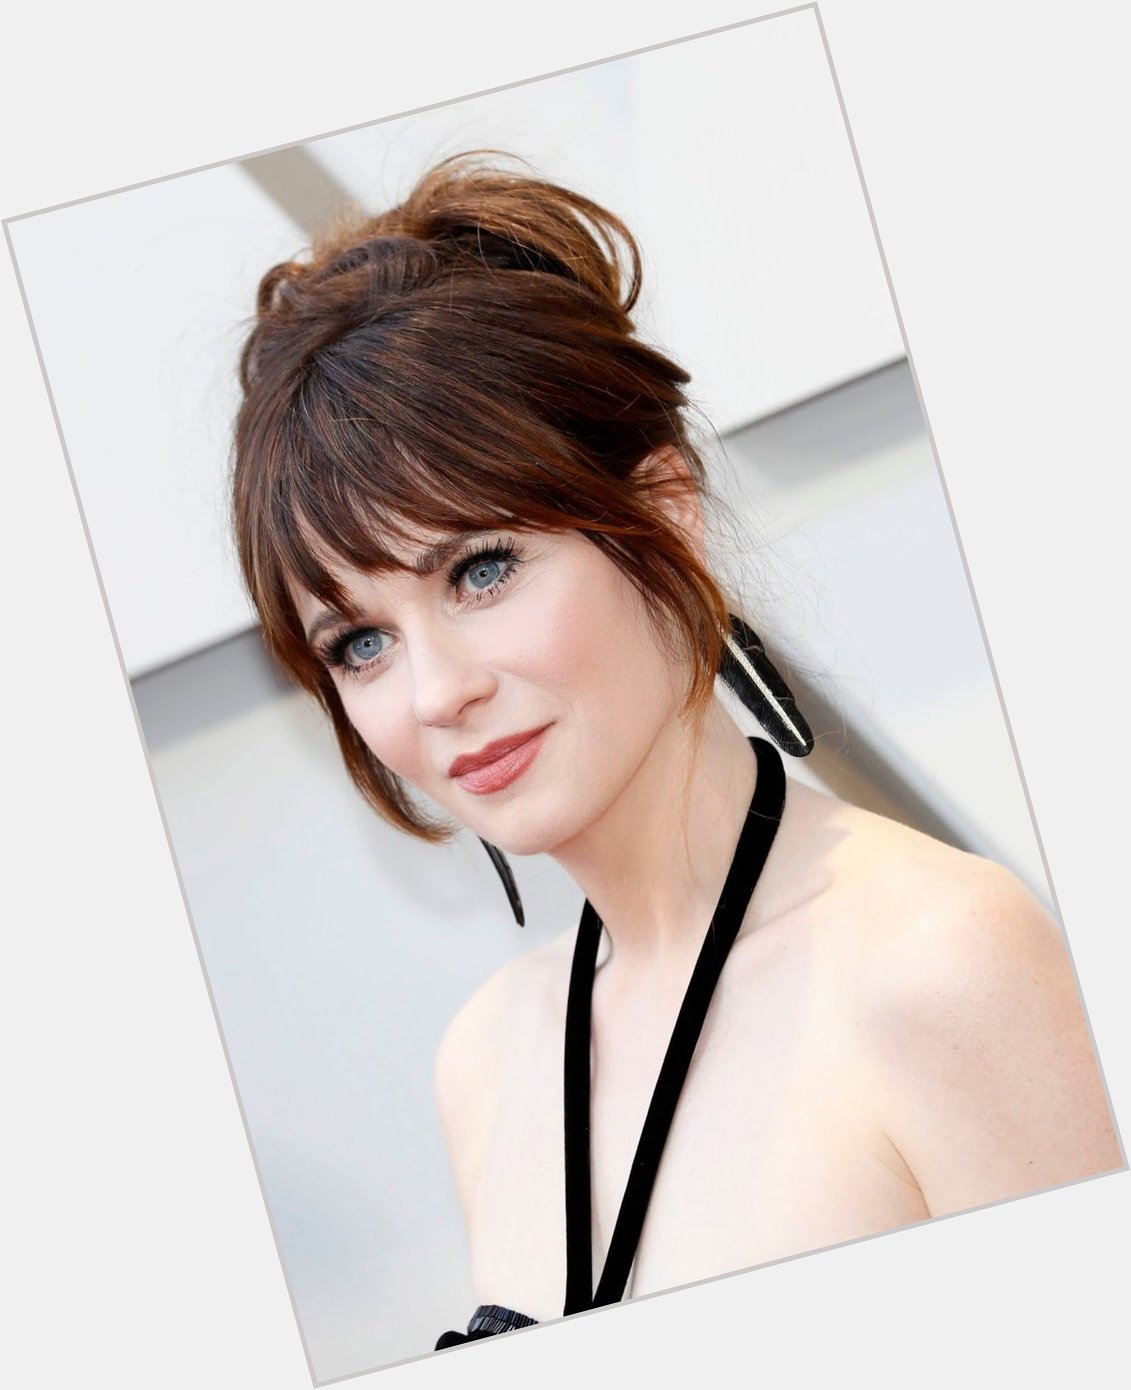 Happy Birthday to the lovely Zooey Deschanel!! 